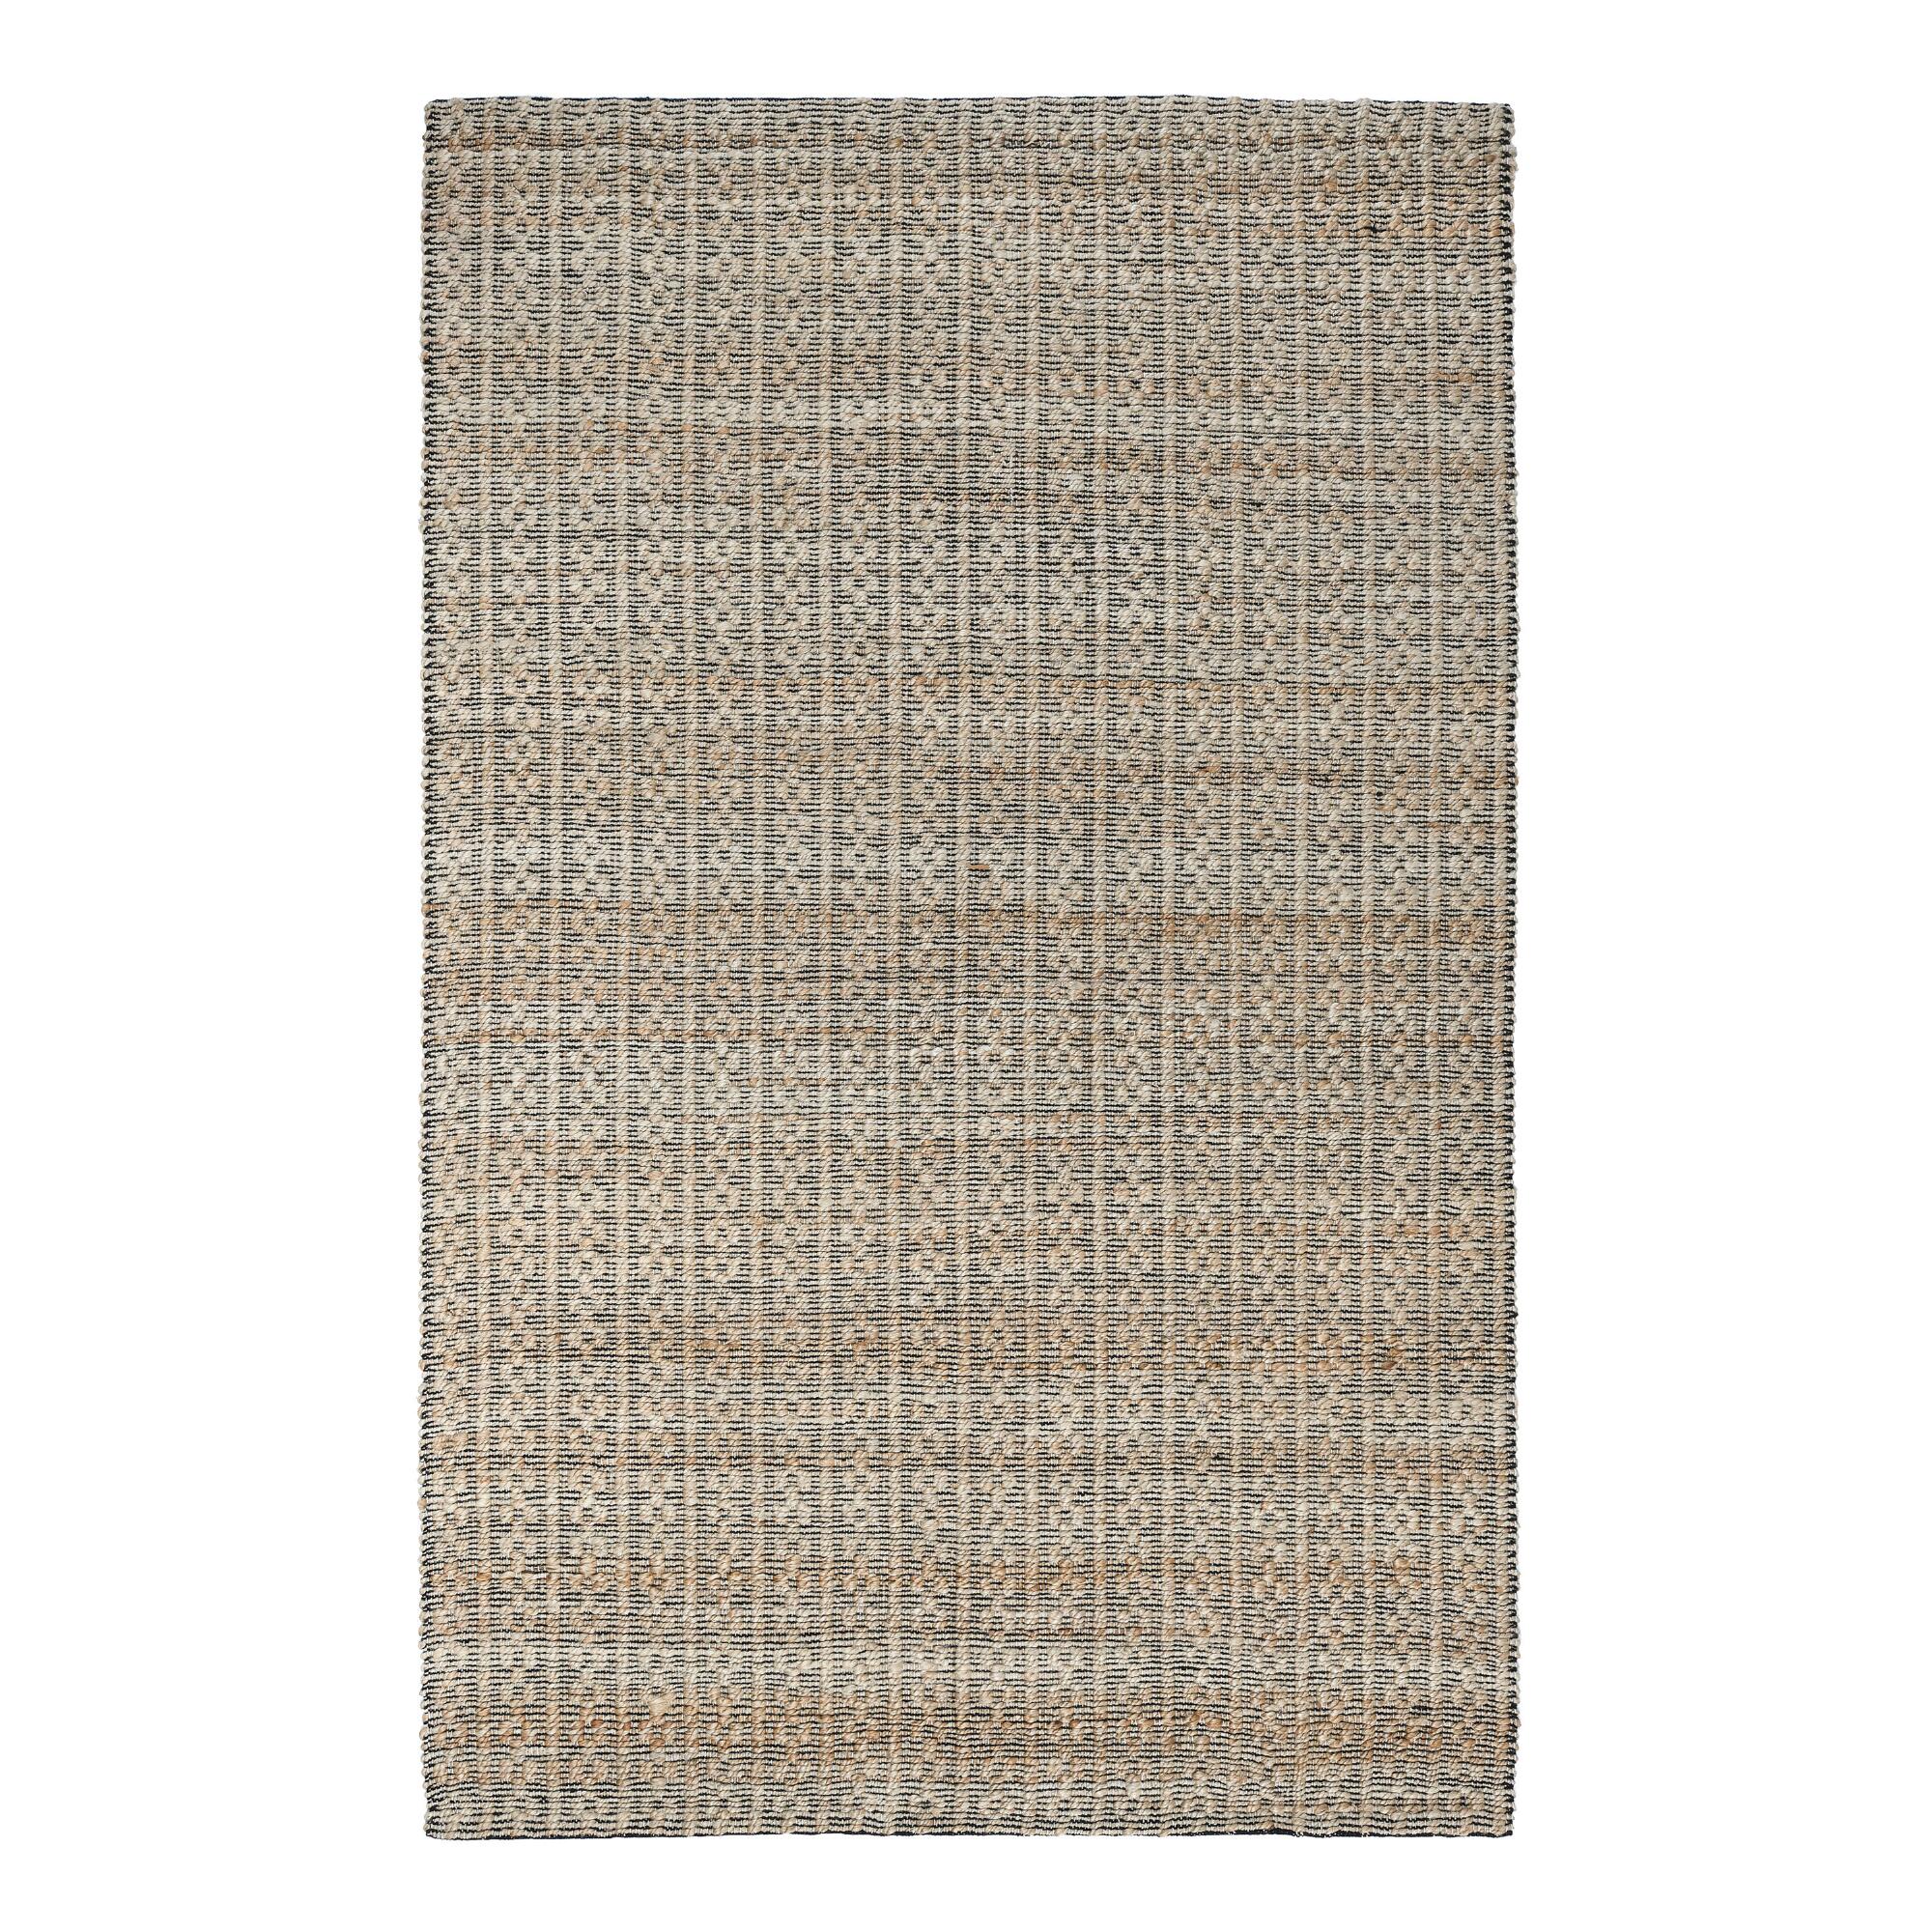 Natural and Black Jute Blend Indus Area Rug by World Market